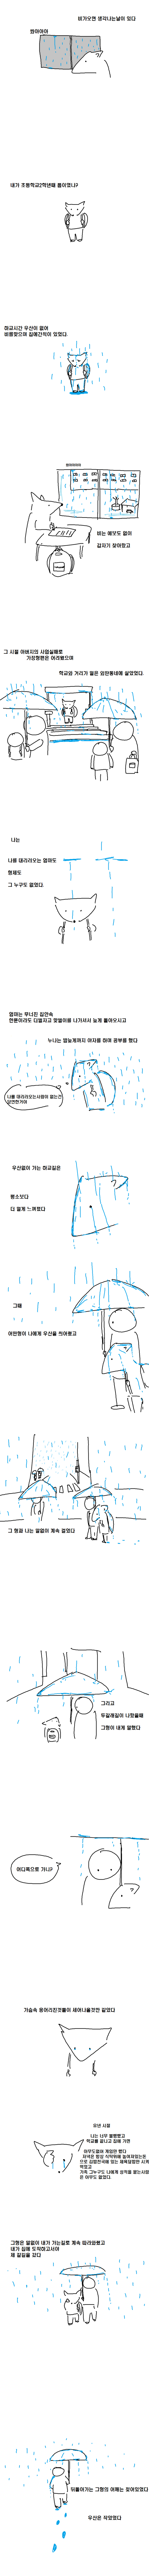 A cartoon that reminds me of that day when it rains